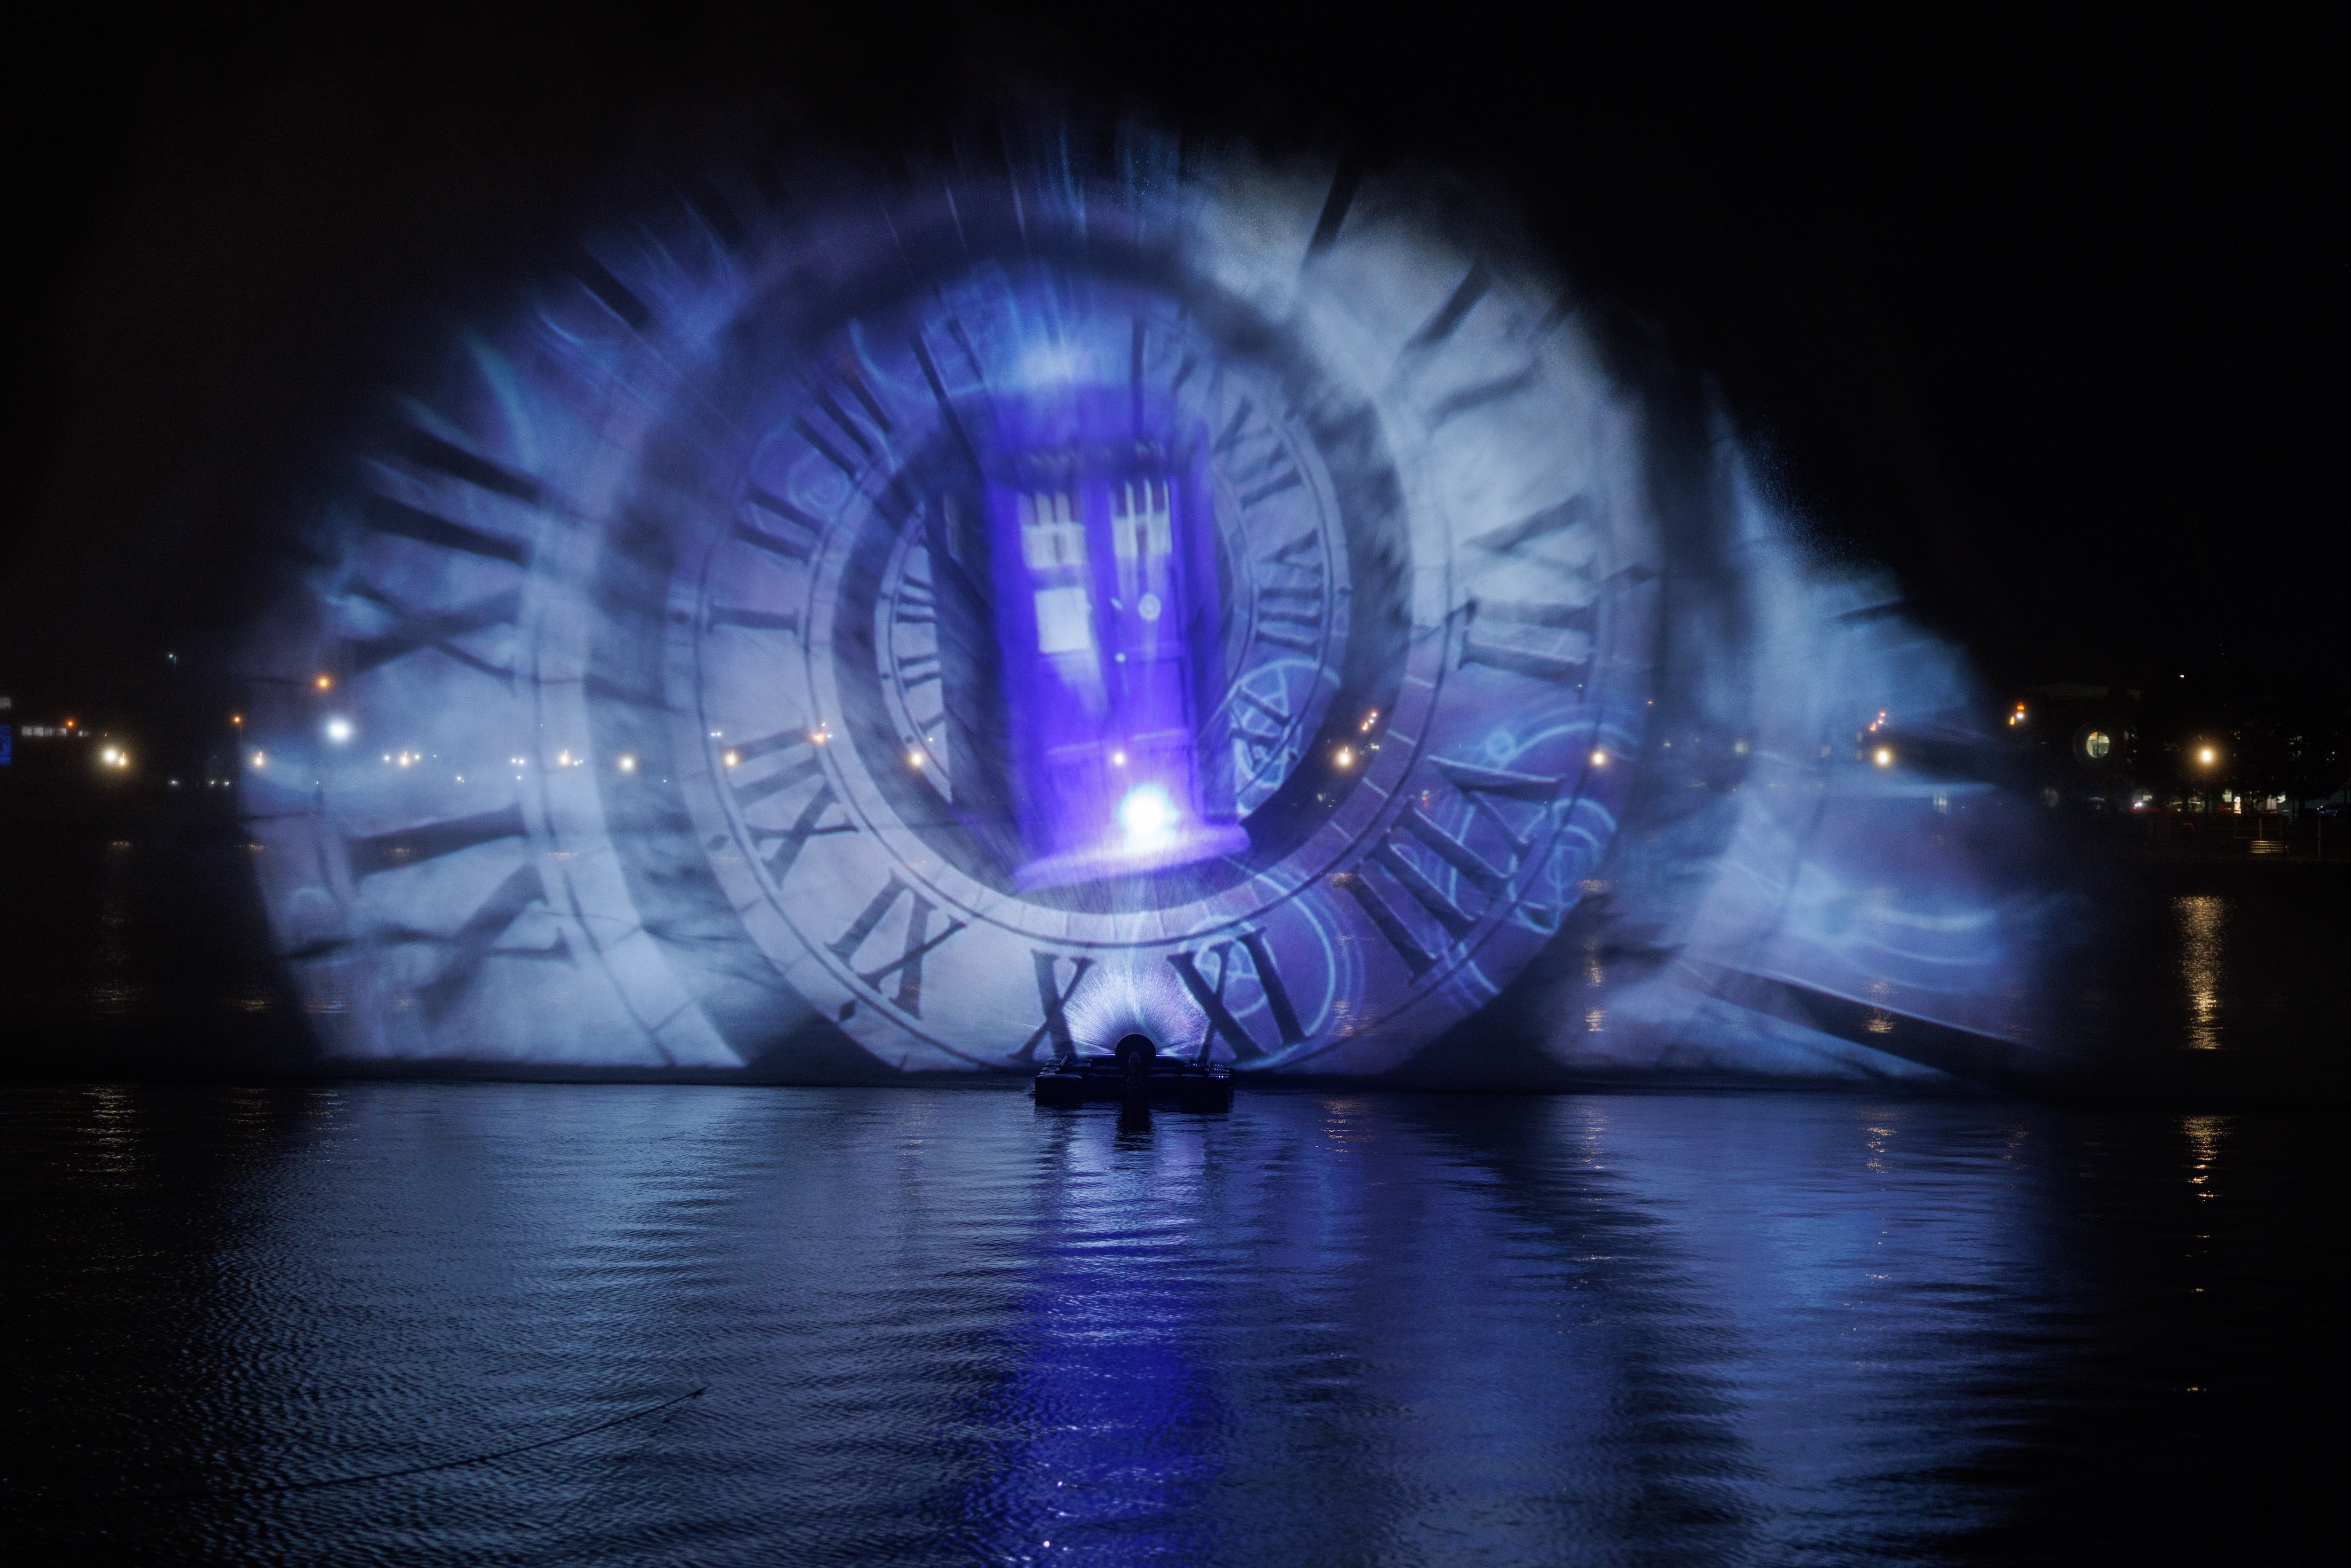 The TARDIS projected into Cardiff bay